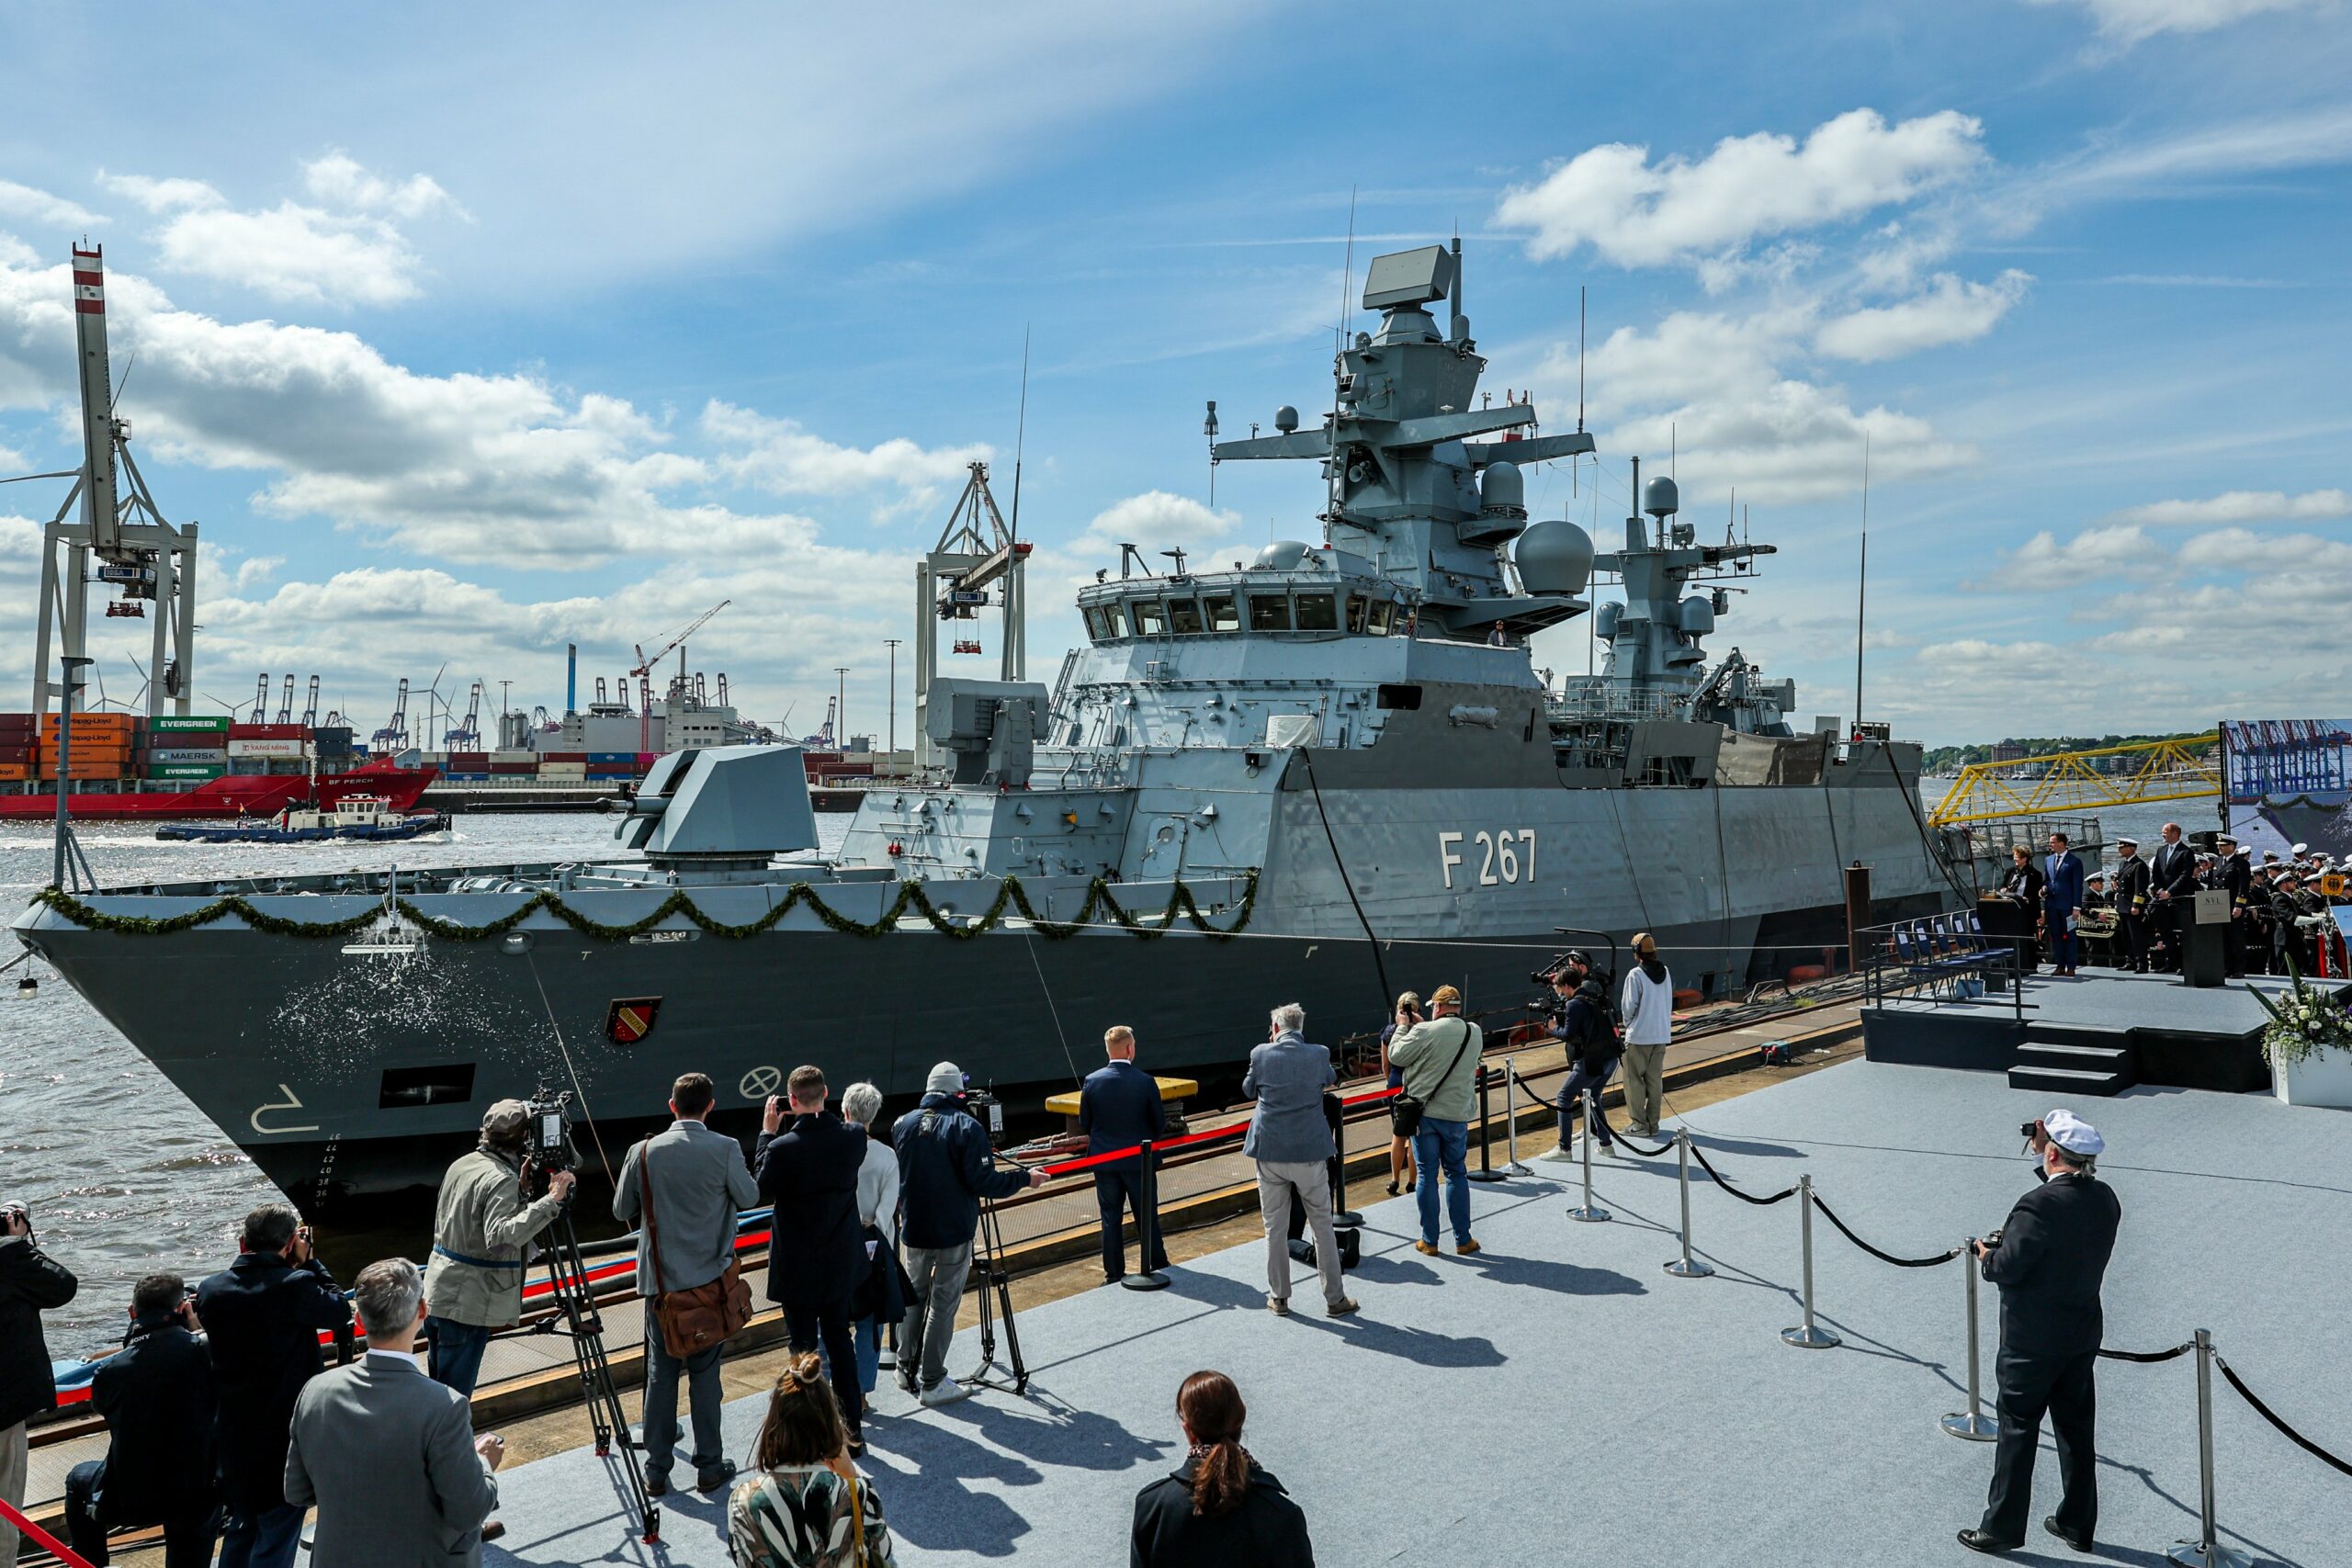 The Karlsruhe, a German Navy corvette, is seen docked in a pier during its christening ceremony. The gray ship's deck railings are decorated with a ribbon made of leaves. The middle of its hull has "F267" painted on it in white. A group of journalists, photographers, and navy officers and personnel are positioned on the dock, observing the corvette. The background is a clear blue sky with some light white clouds.